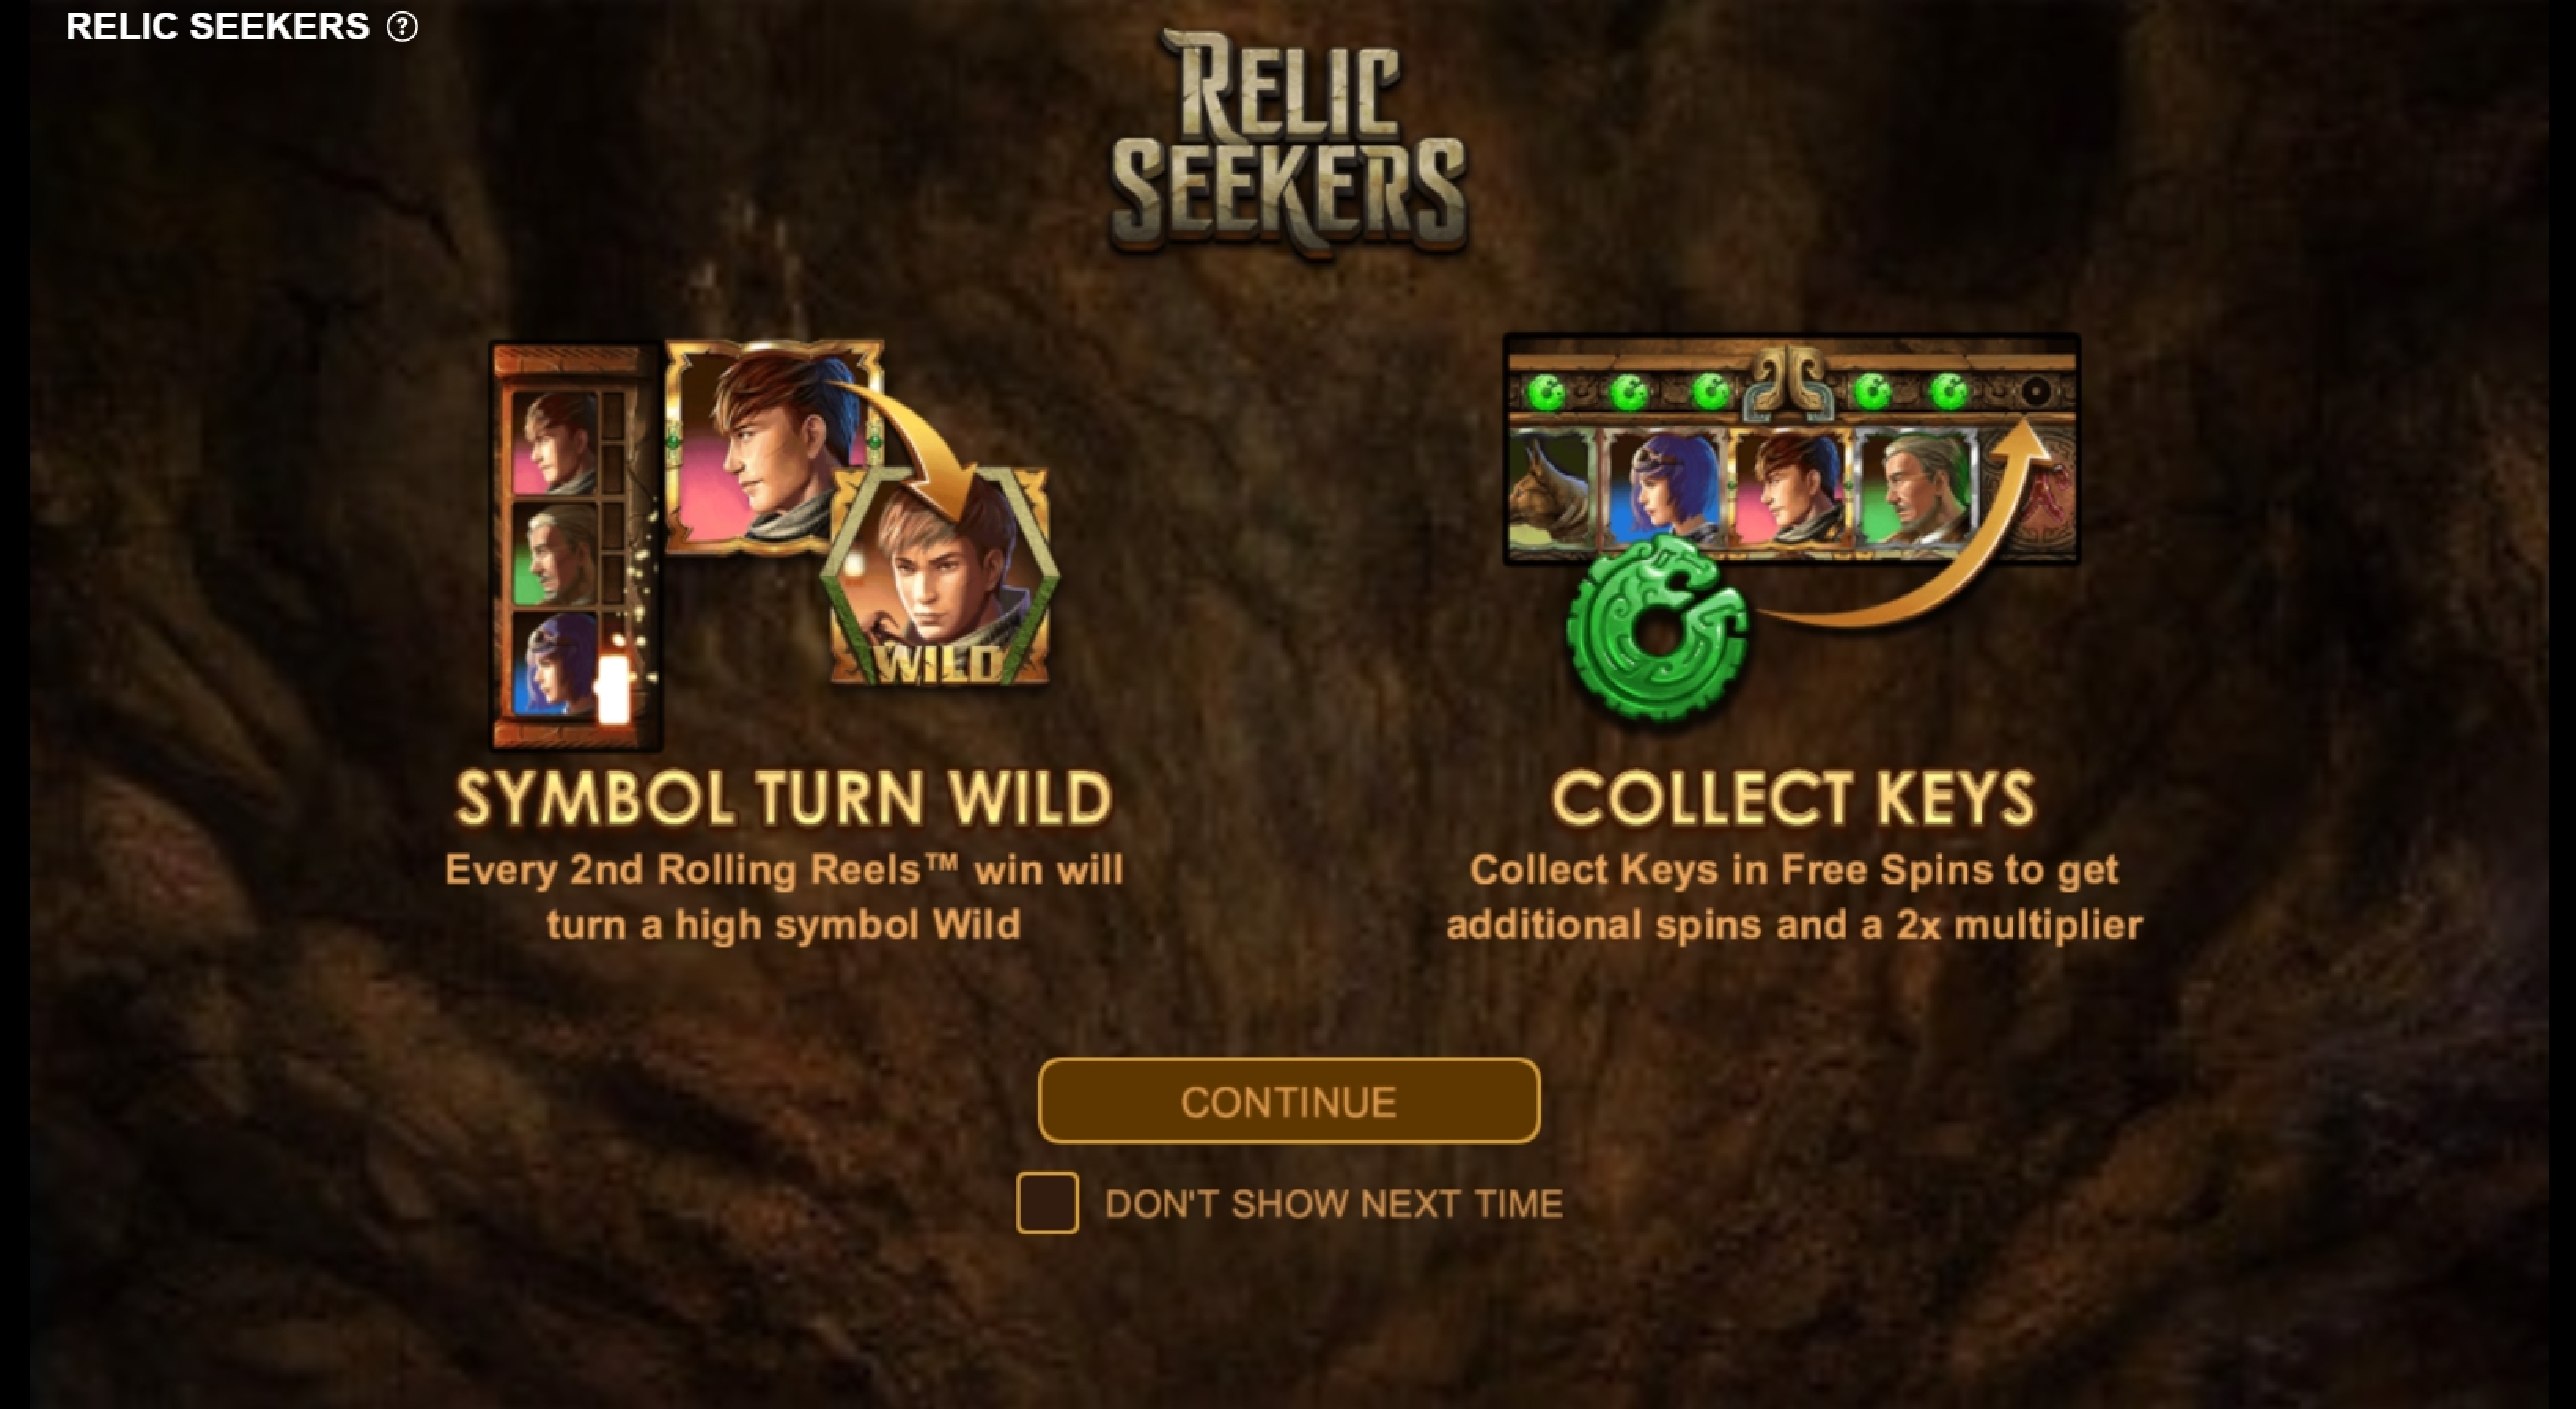 Play Relic Seekers Free Casino Slot Game by Pulse 8 Studios